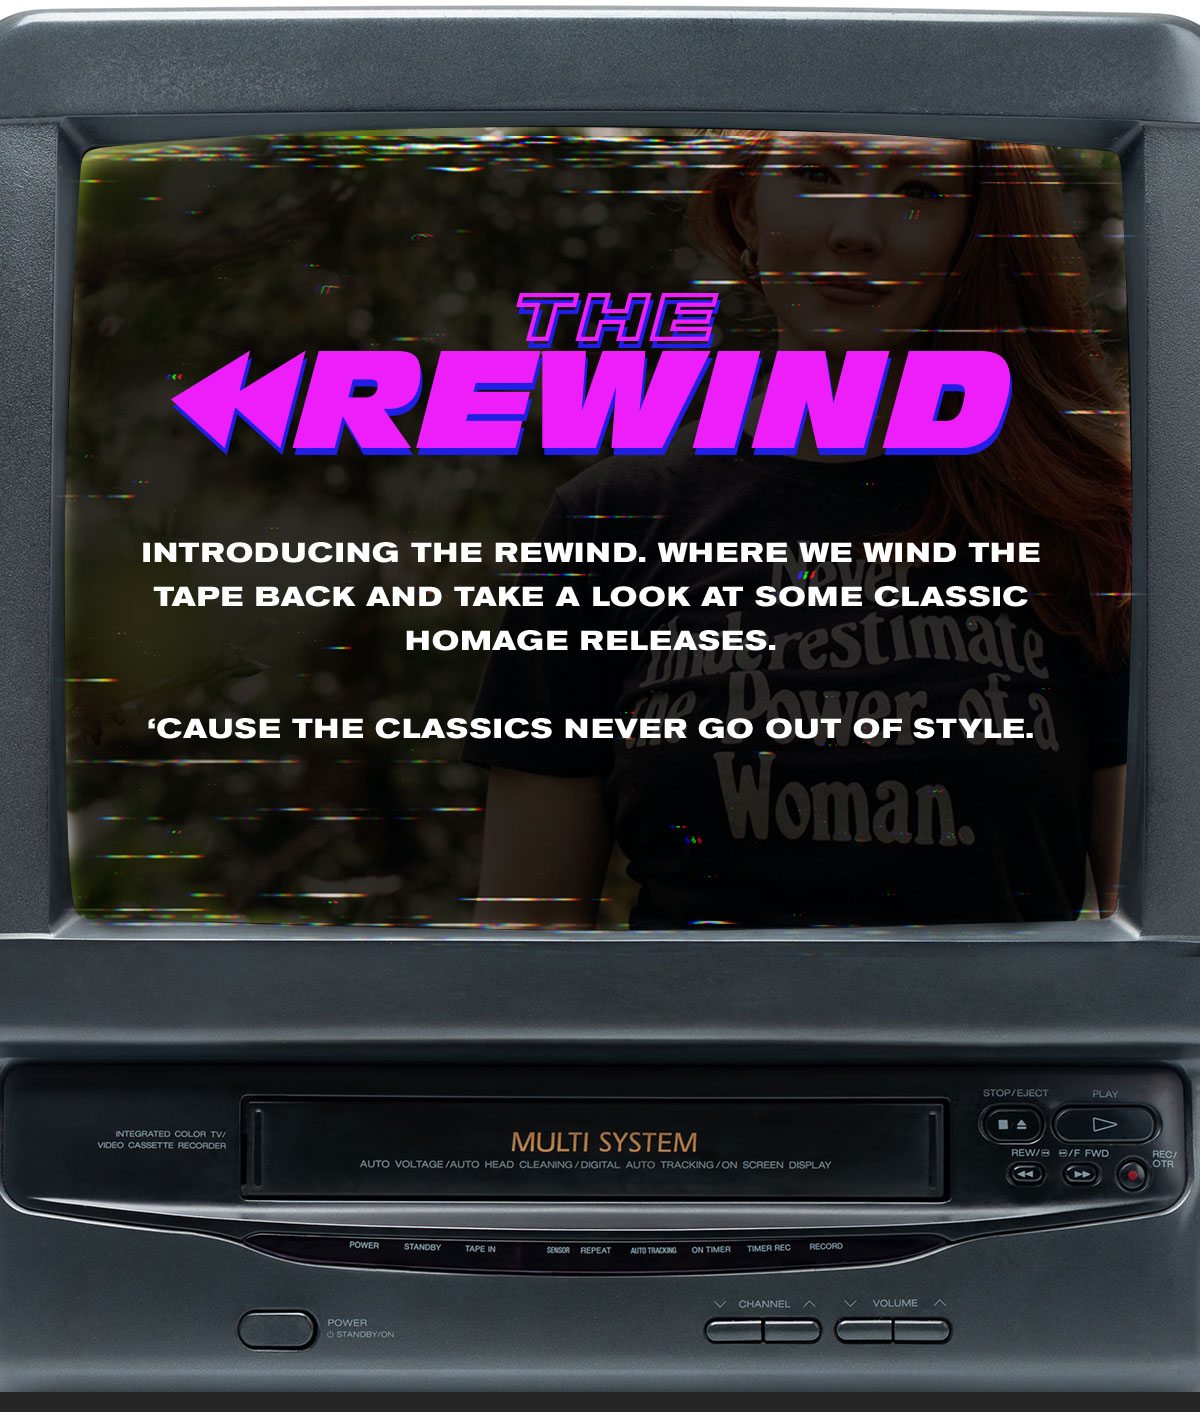 The Rewind: Introducing The Rewind, where we wind the tape back and take a look at some classic Homage releases. 'Cause the classics never go out of style.